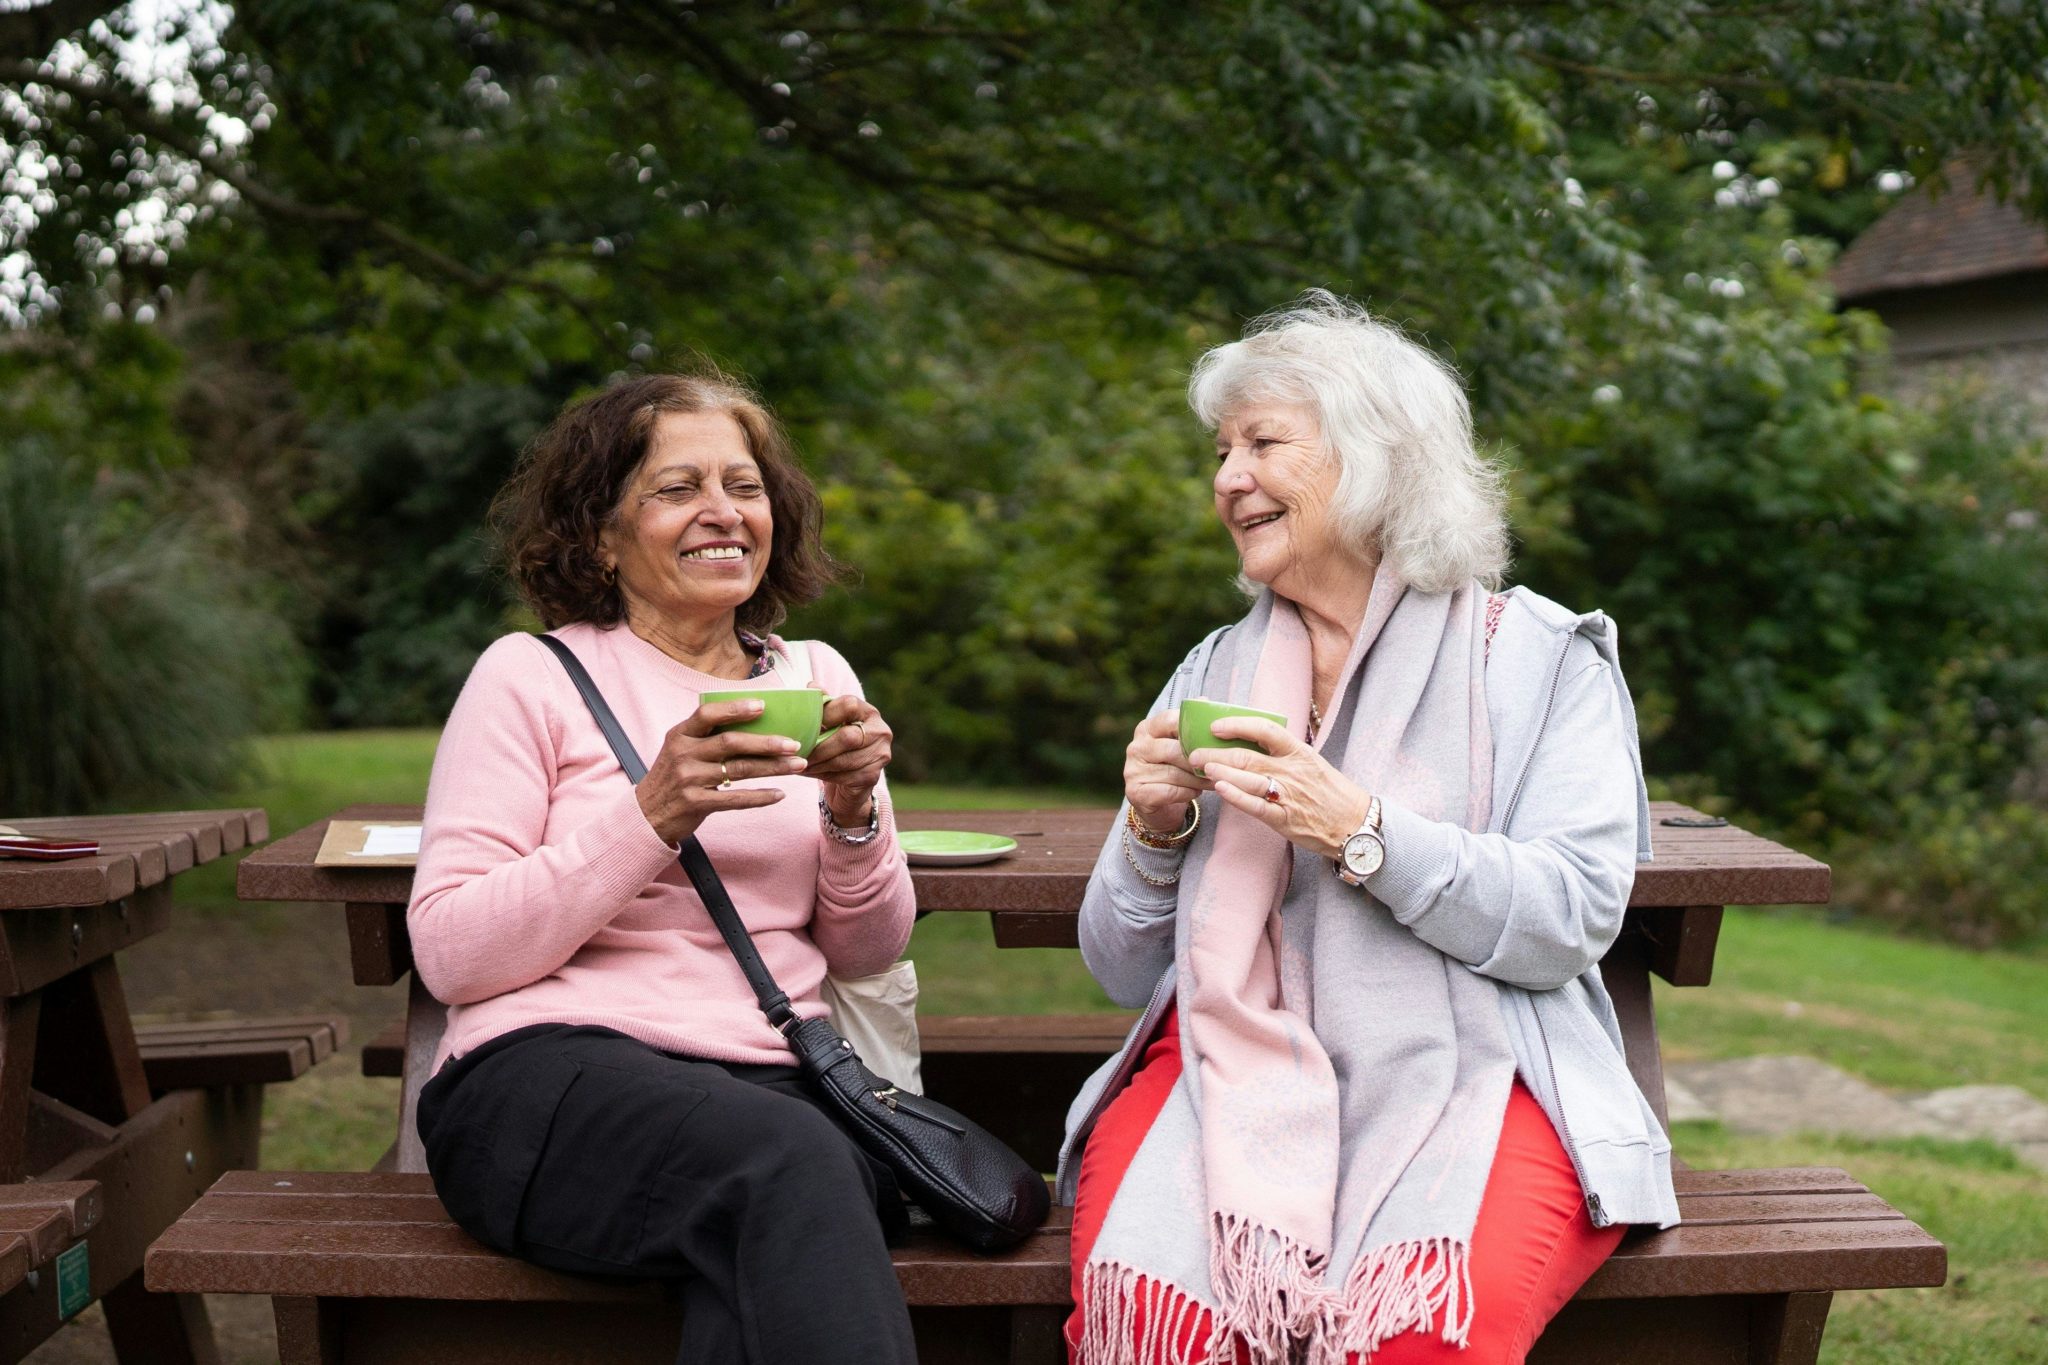 Two women smiling and holding cups on a park bench